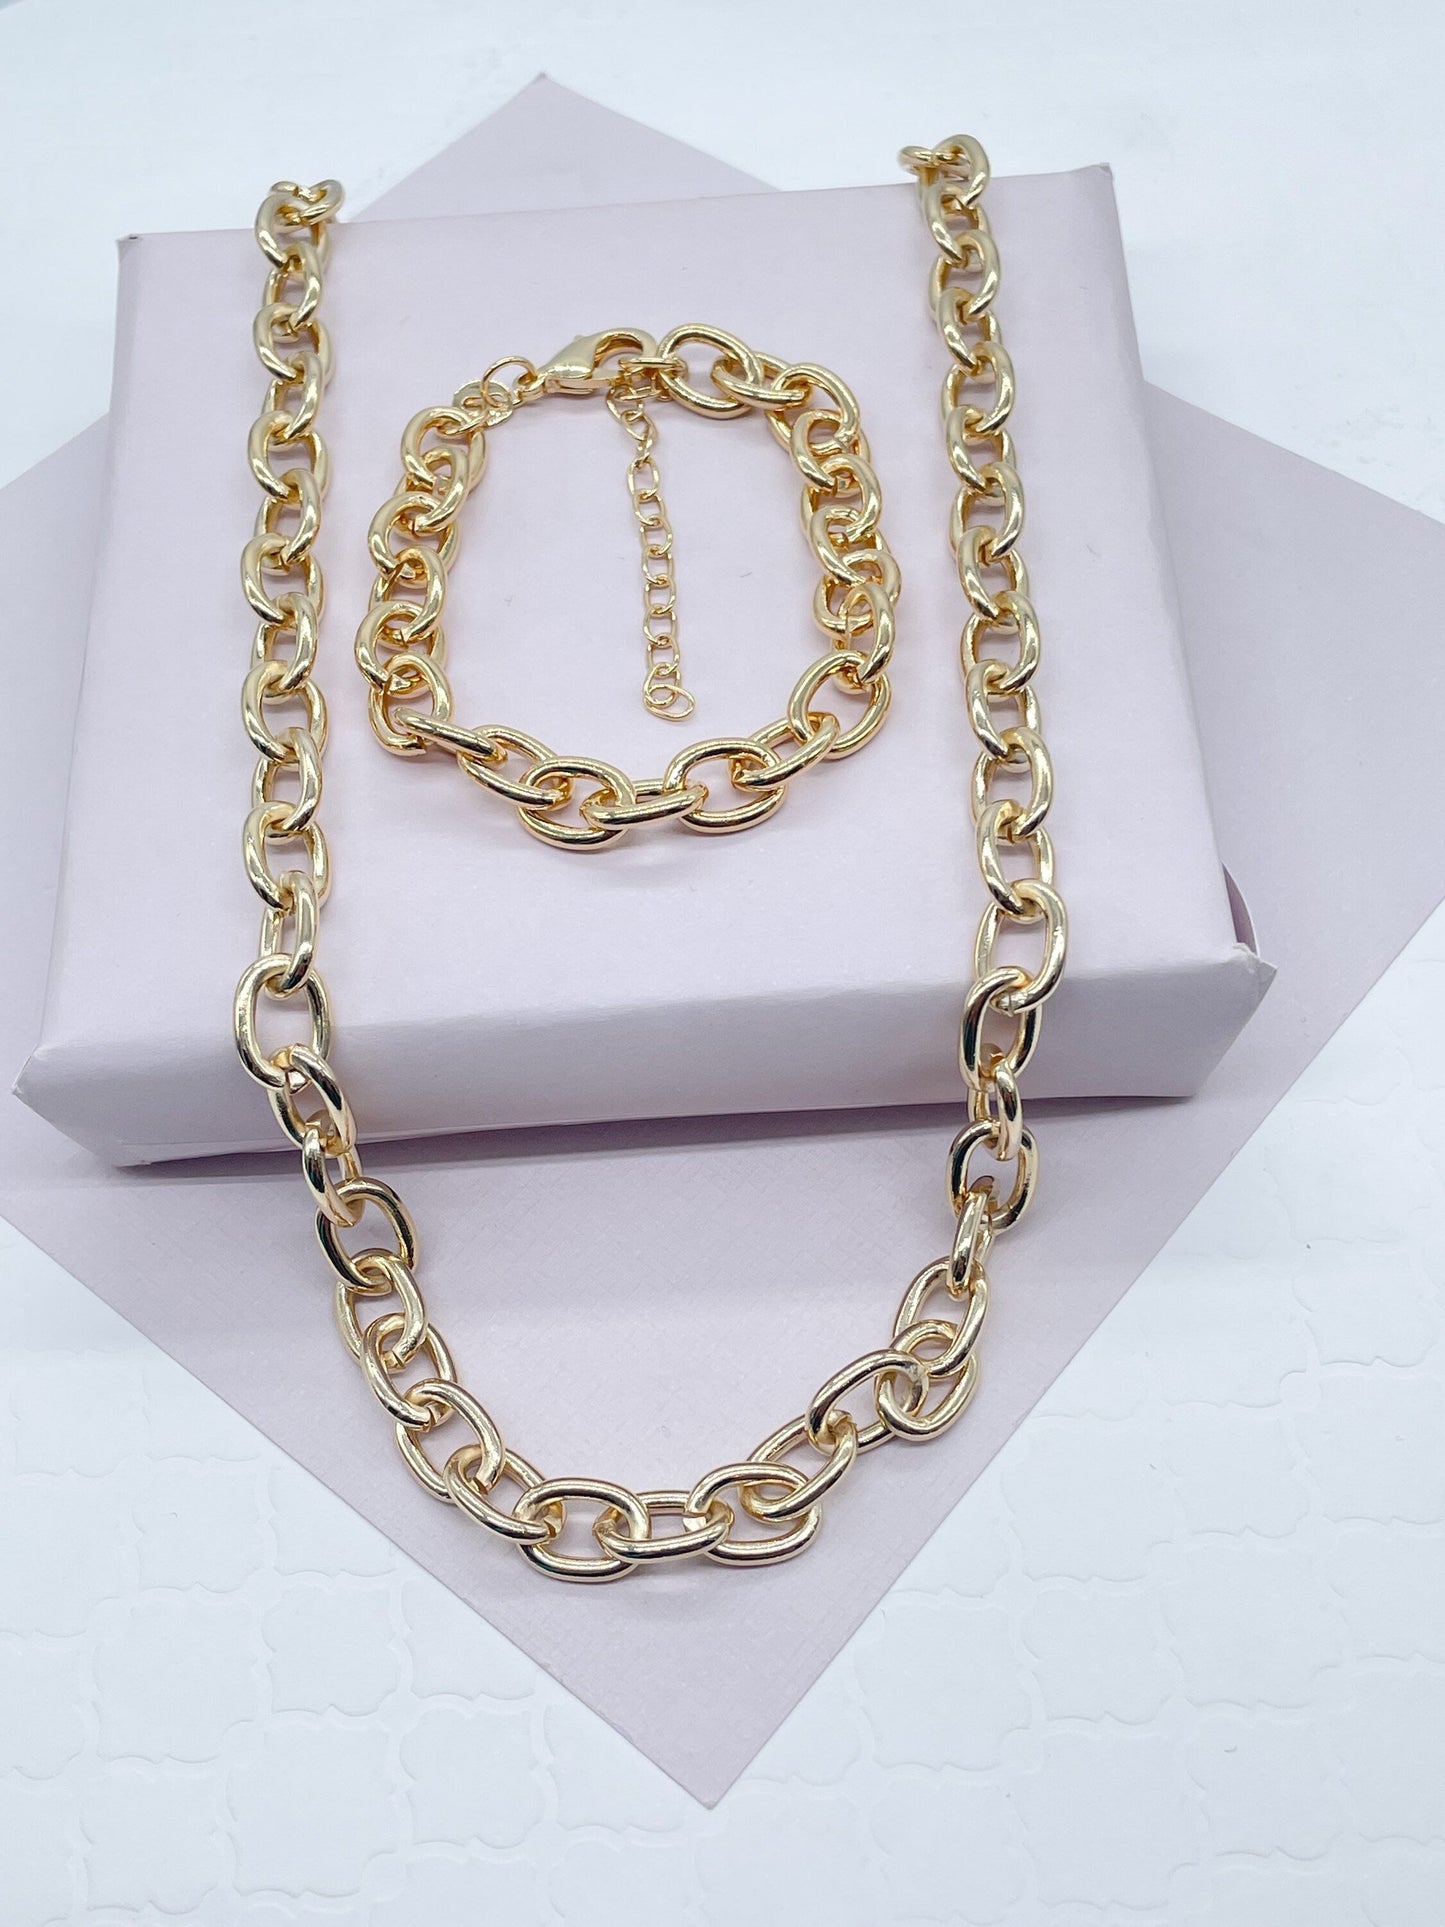 18k Gold Filled Chunky "but Light" Link Necklace Bracelet Set With Extenders, Gift  Her Jewelry